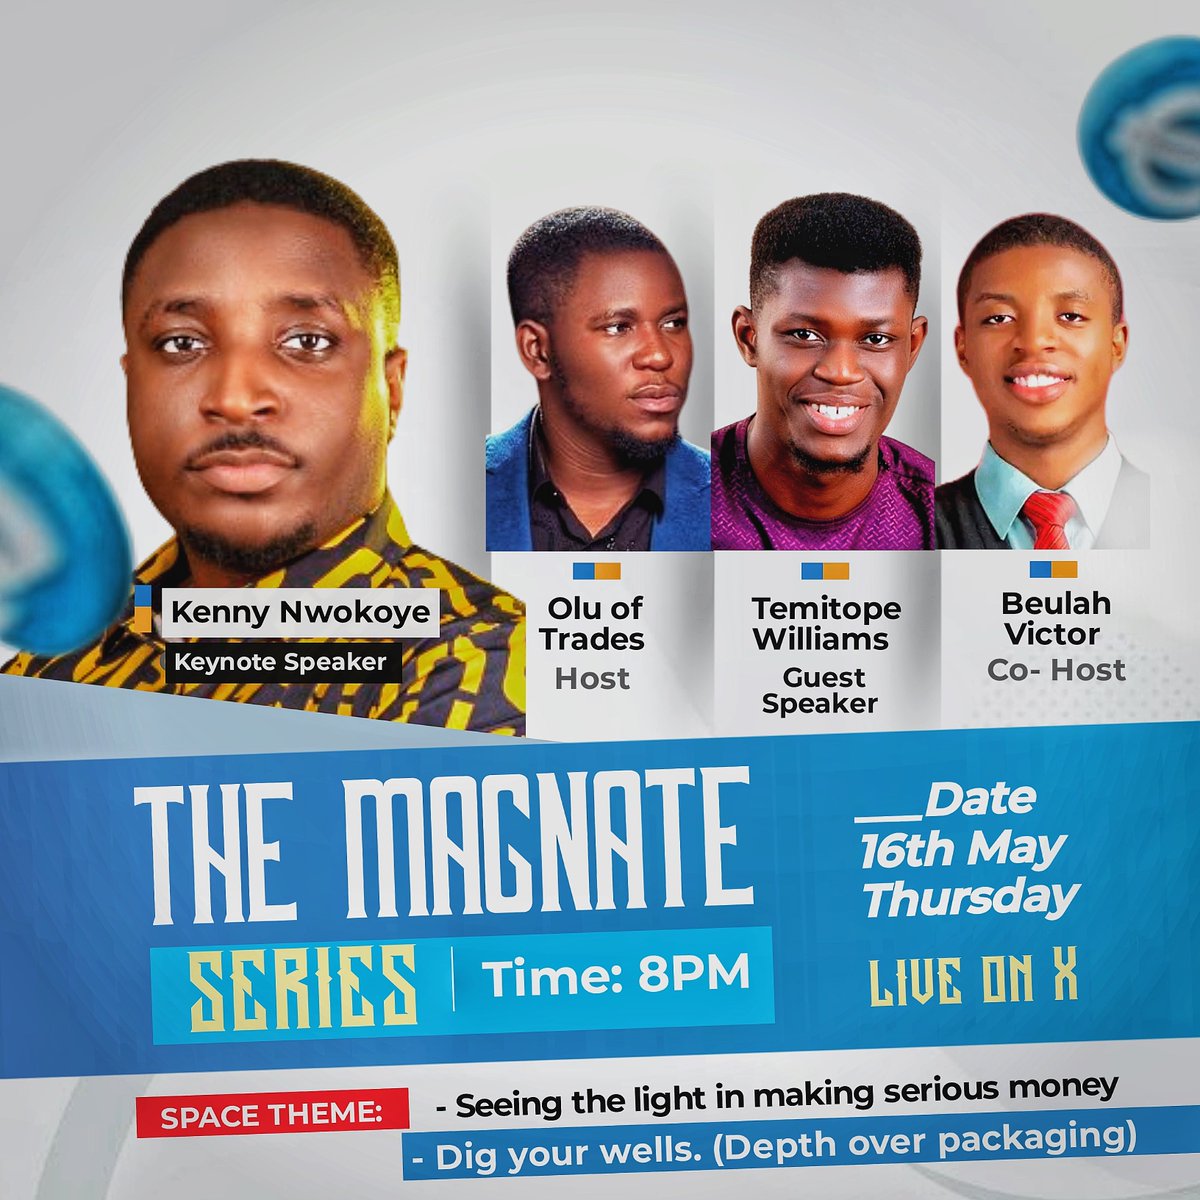 The Magnate series has become once every month. This May, we will be having @KennyNwokoye as our Keynote Speaker and @phi_lipss as our guest speakers TOPIC: -Seeing the light in making serious money -Dig your wells (Depth over Packaging) Link to register will be in the thread